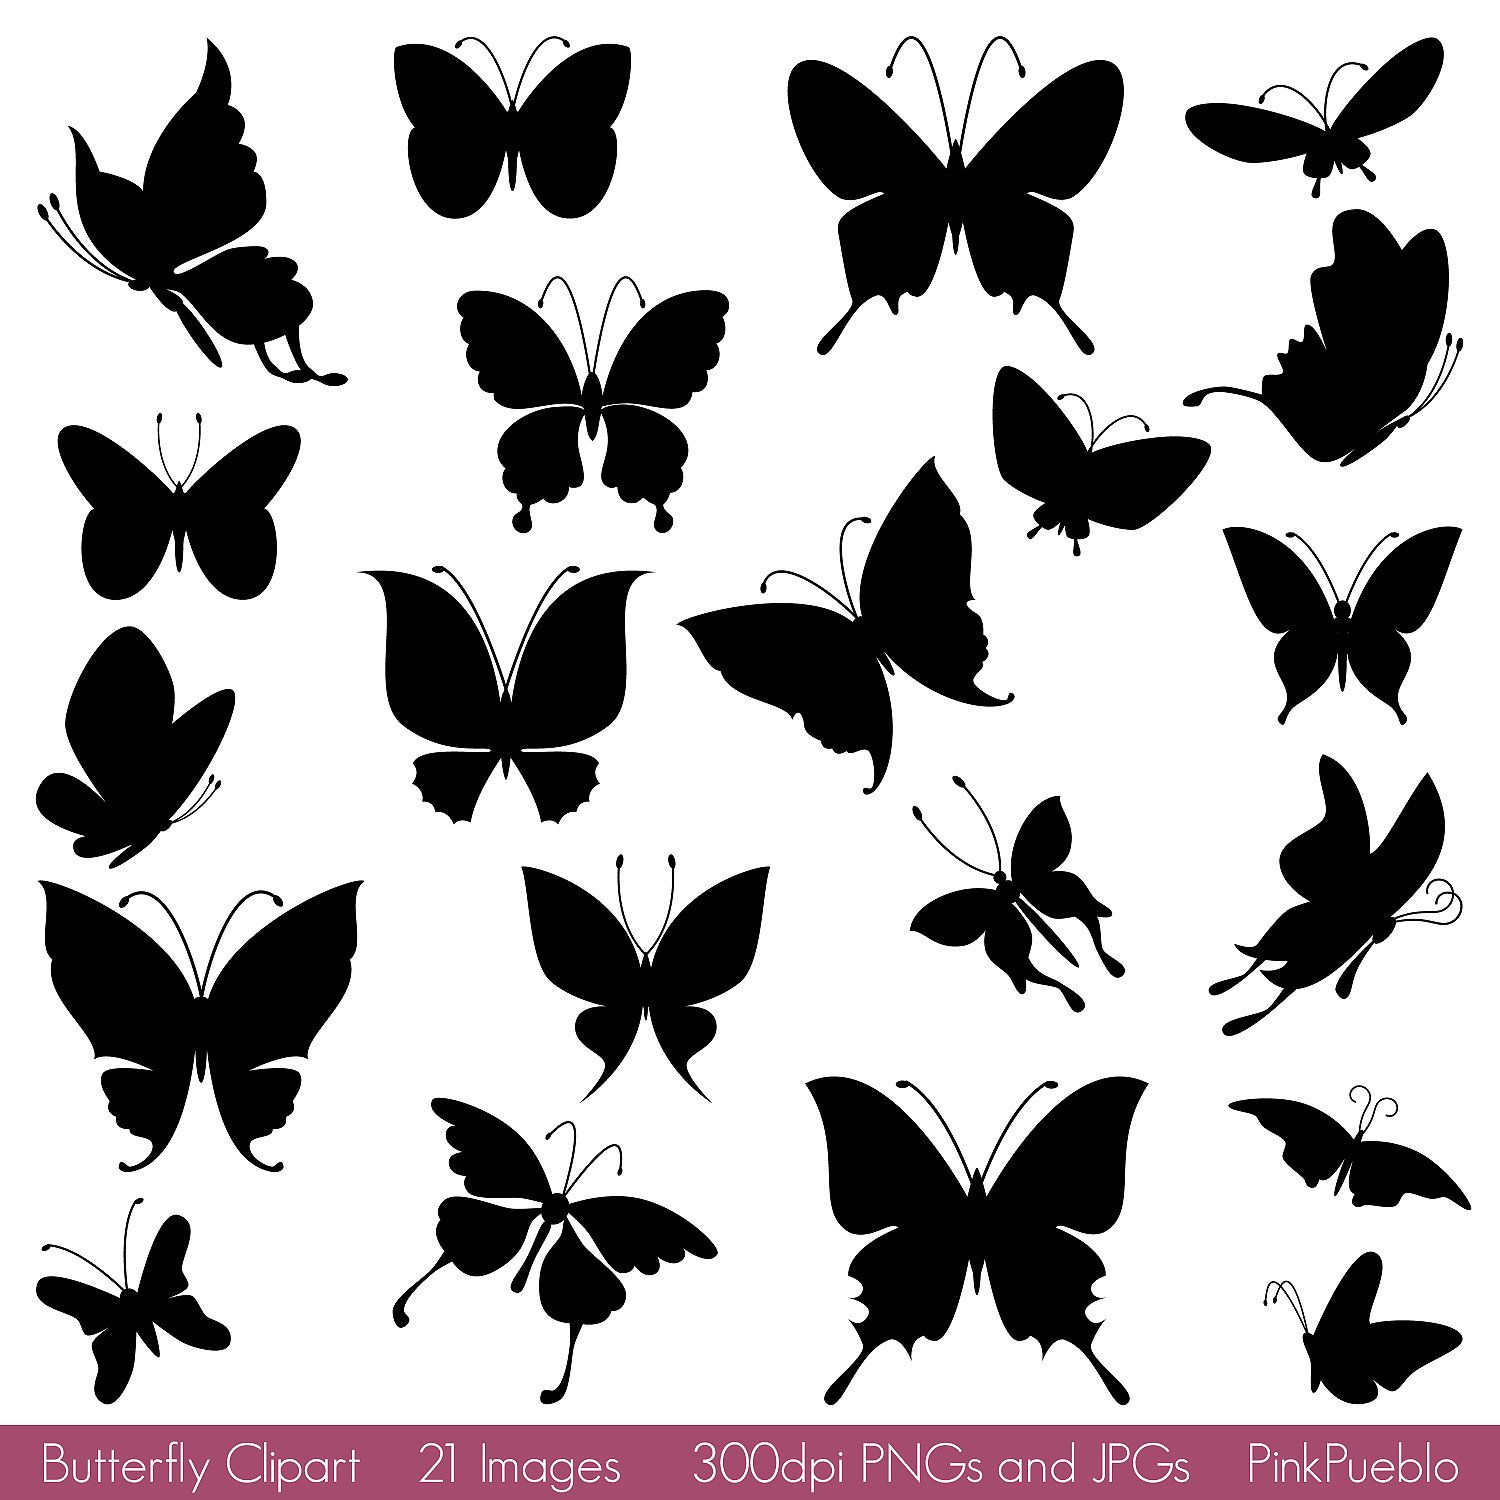 Butterfly silhouettes clipart.